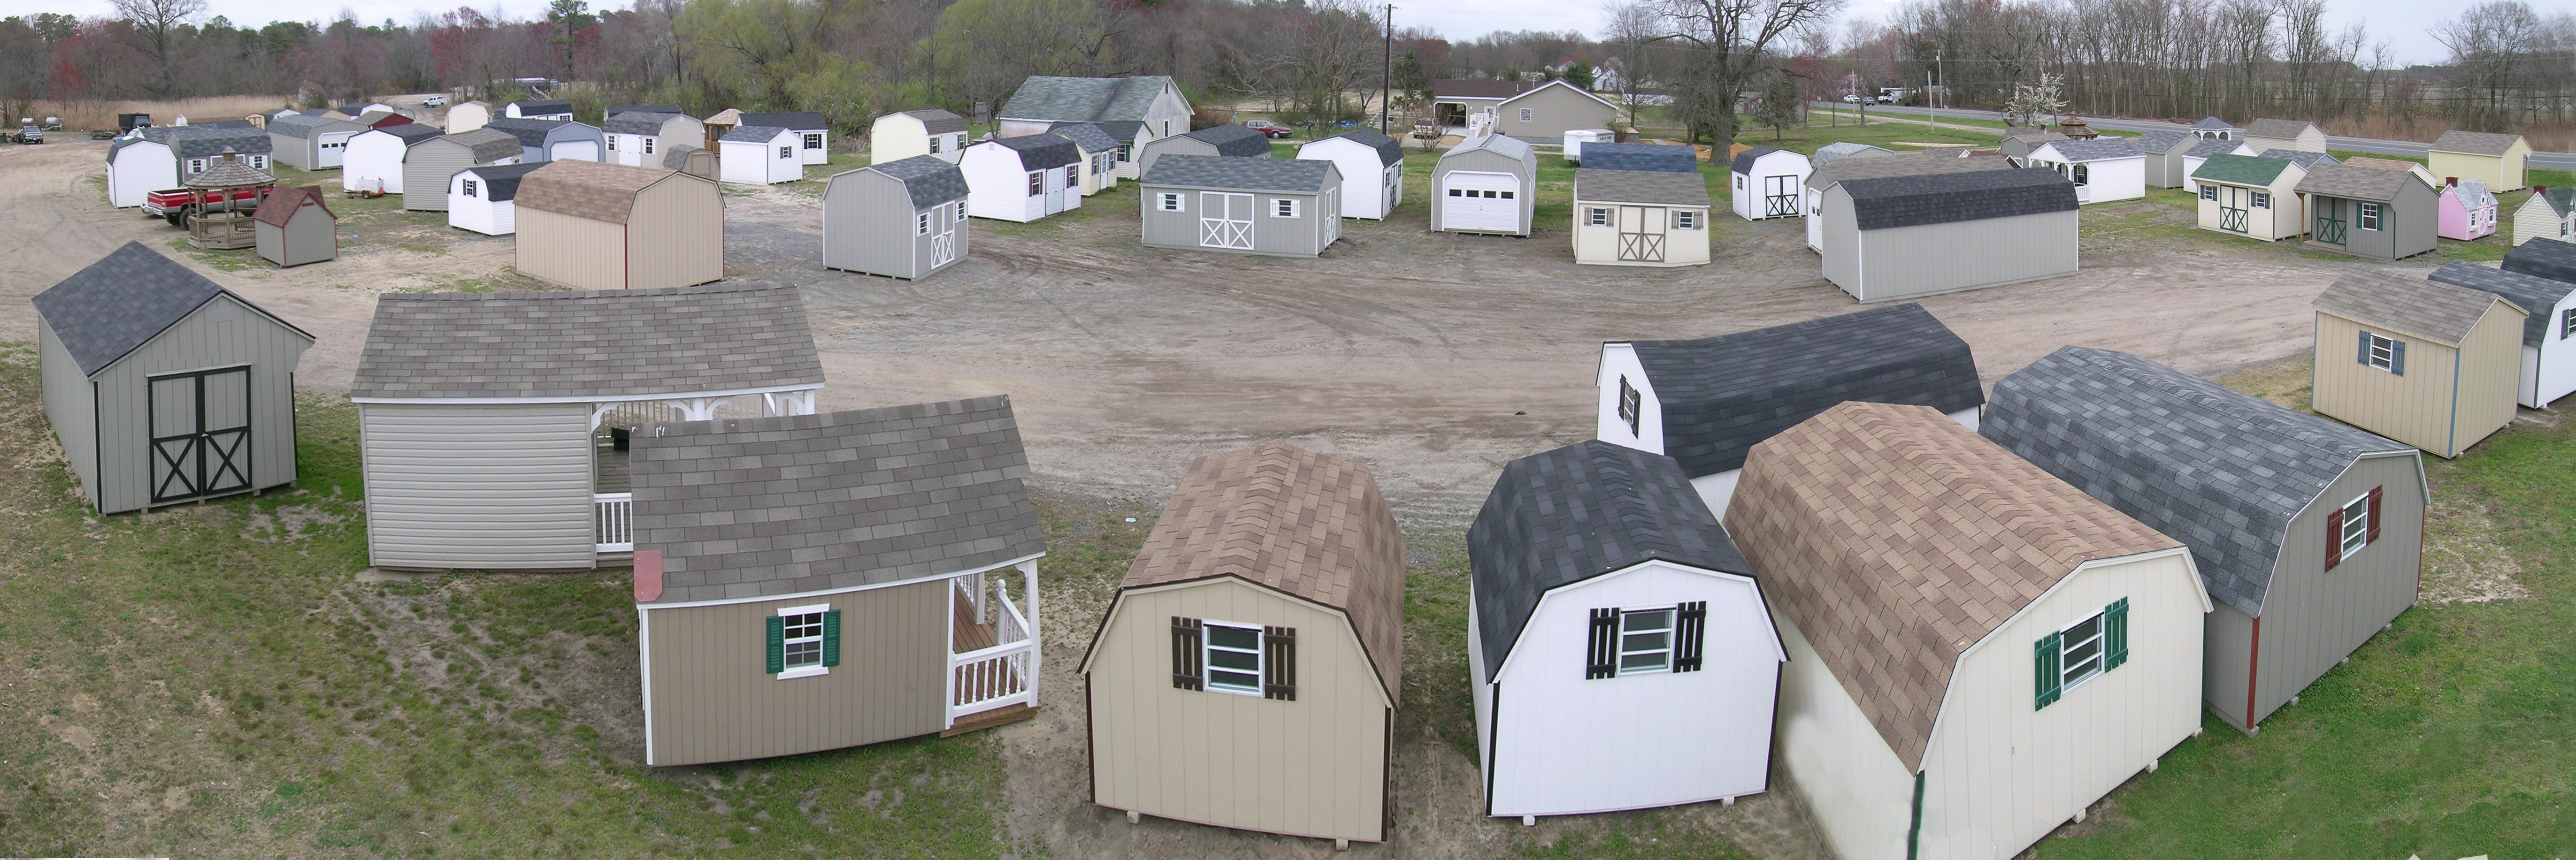 Panoramic view of TJ Farm inventory of Amish Building